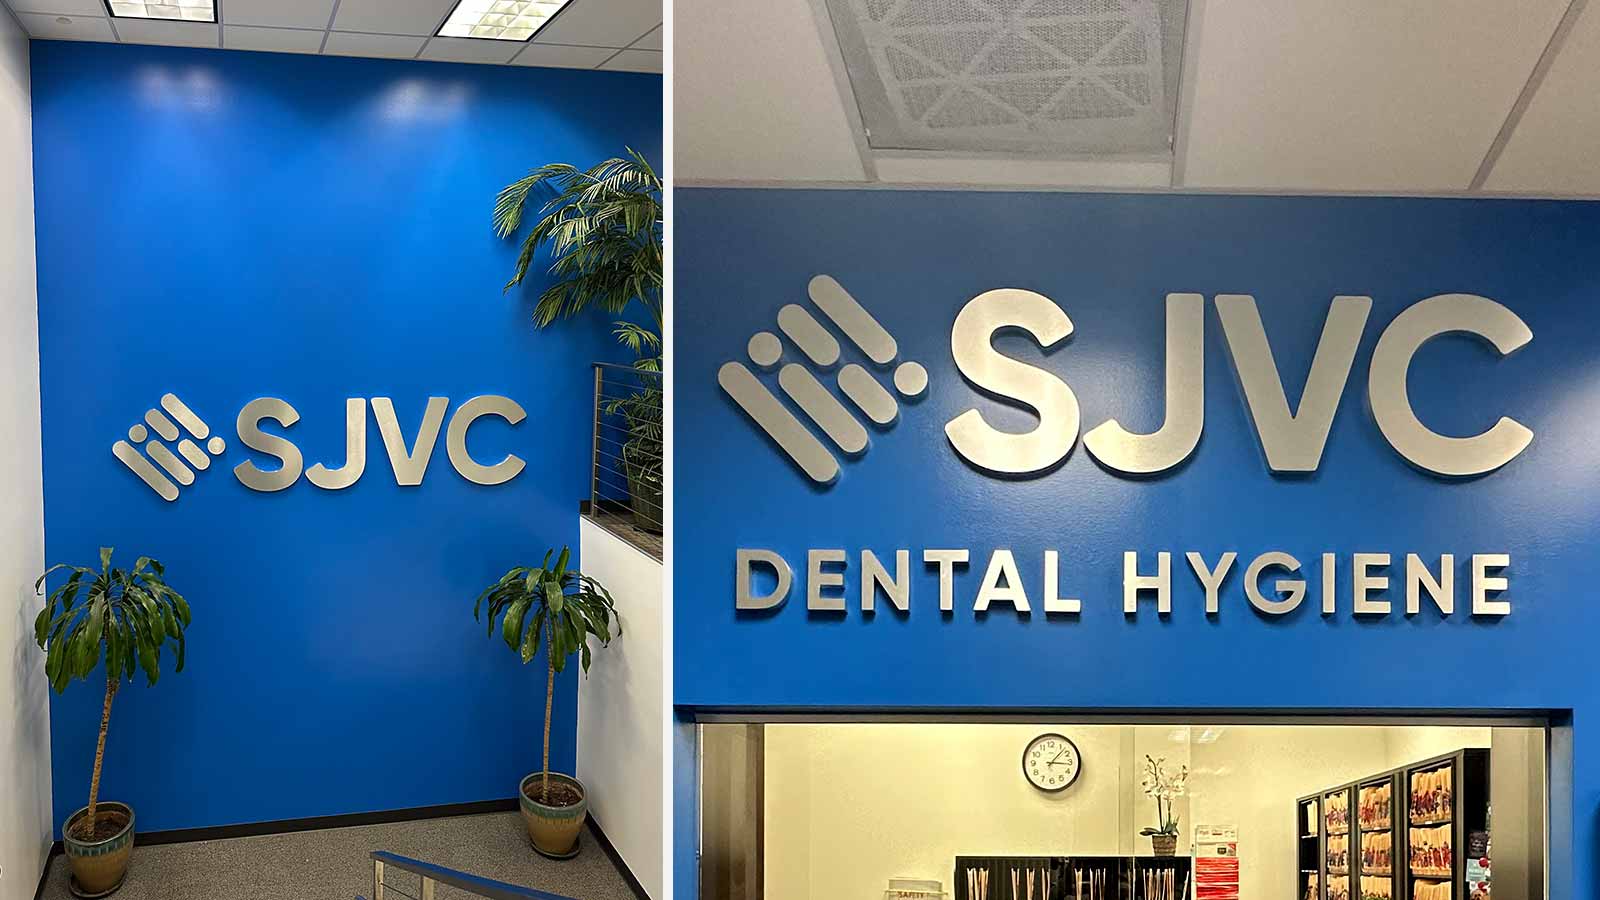 sjvc aluminum signs attached to the walls